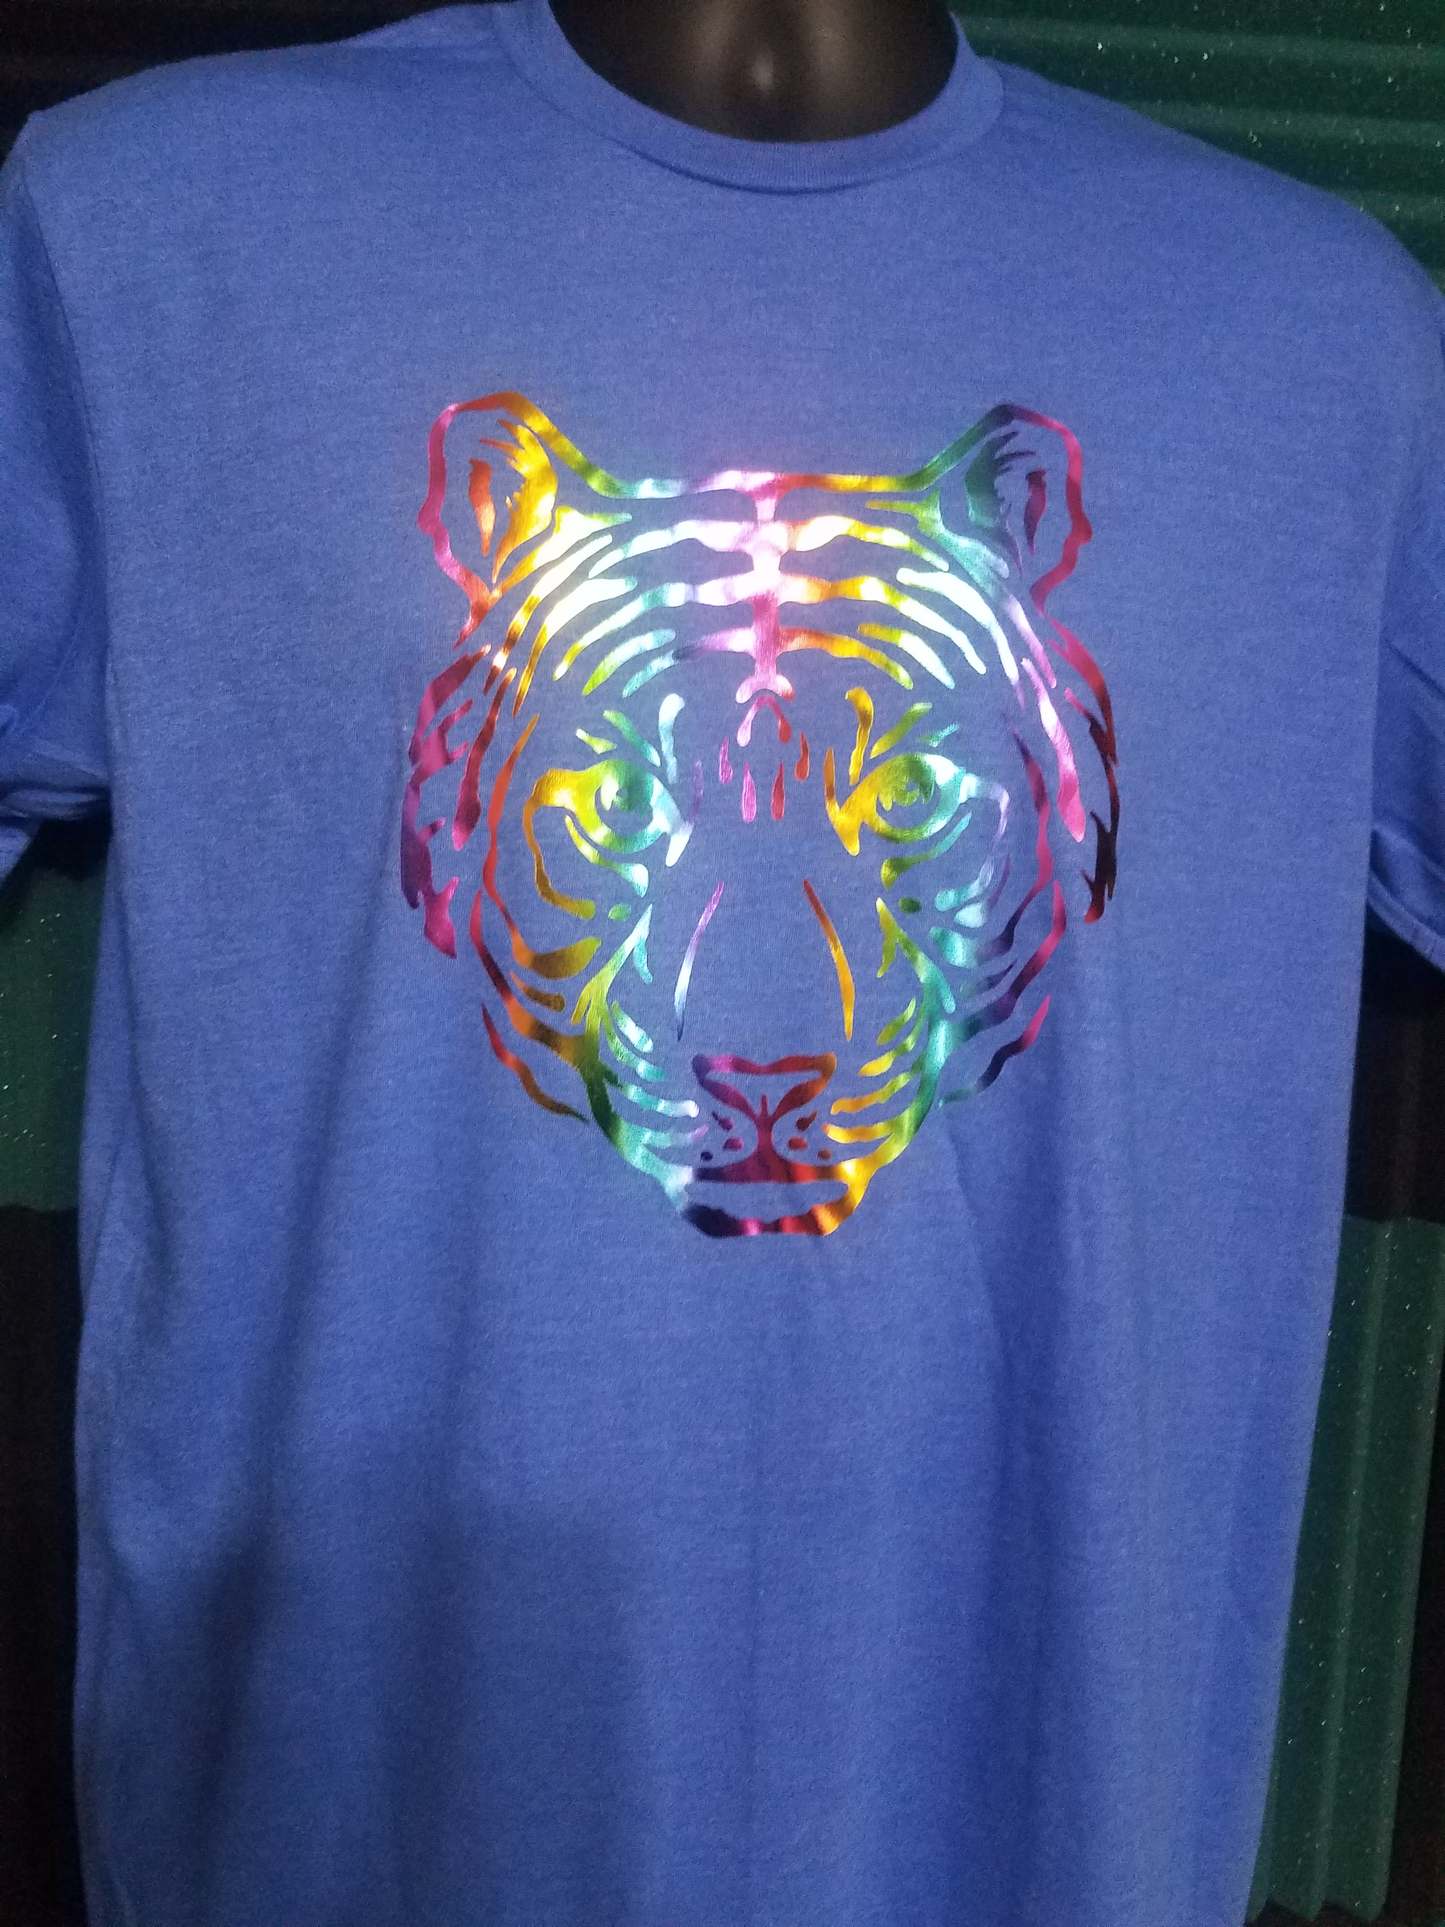 Tiger Image T-Shirt Printed With Reflective Rainbow. Unisex Short Sleeve Adult